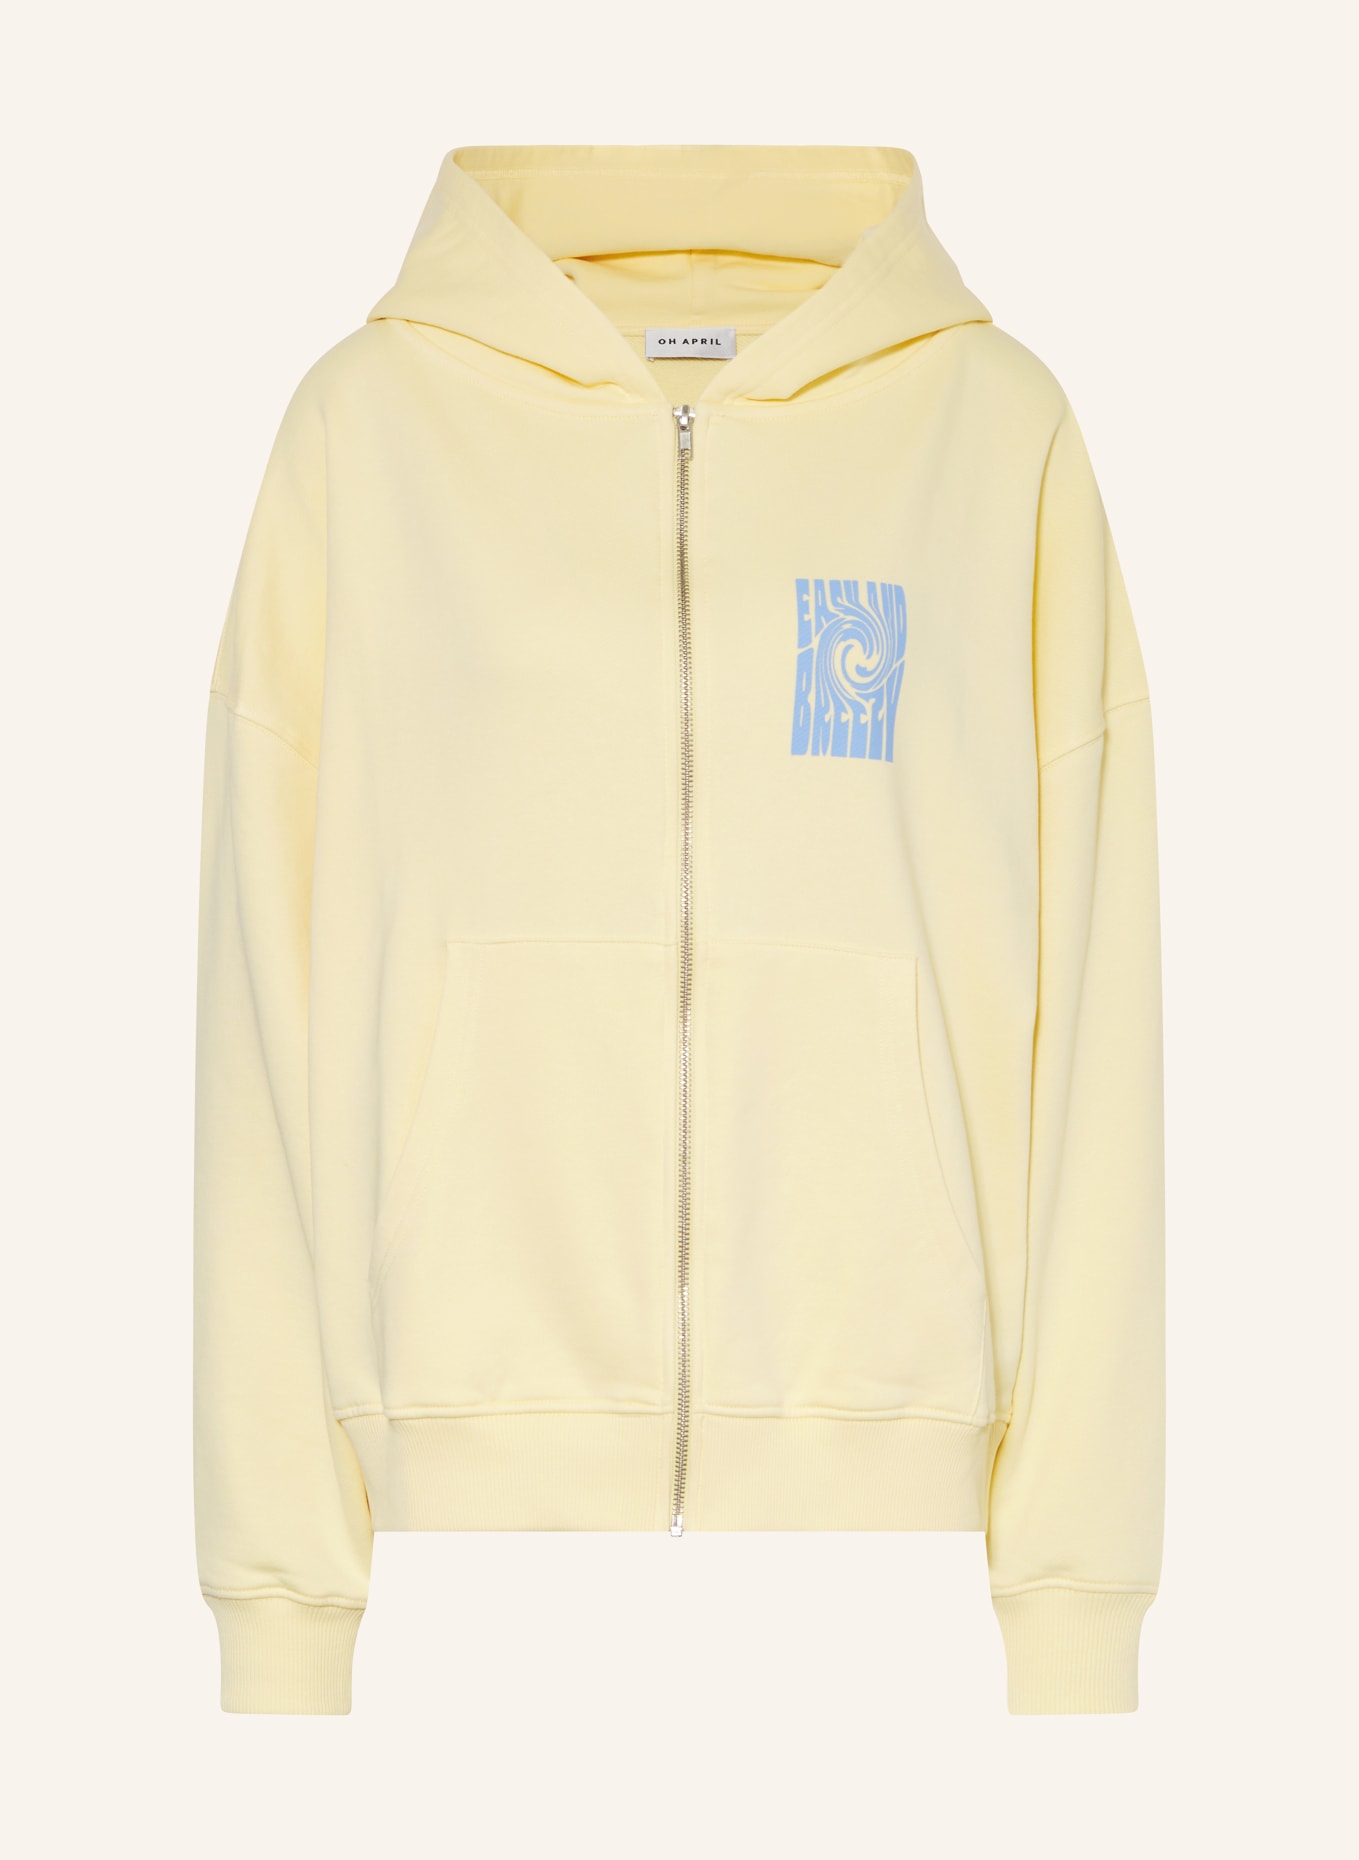 OH APRIL Sweat jacket, Color: BLUE/ YELLOW (Image 1)